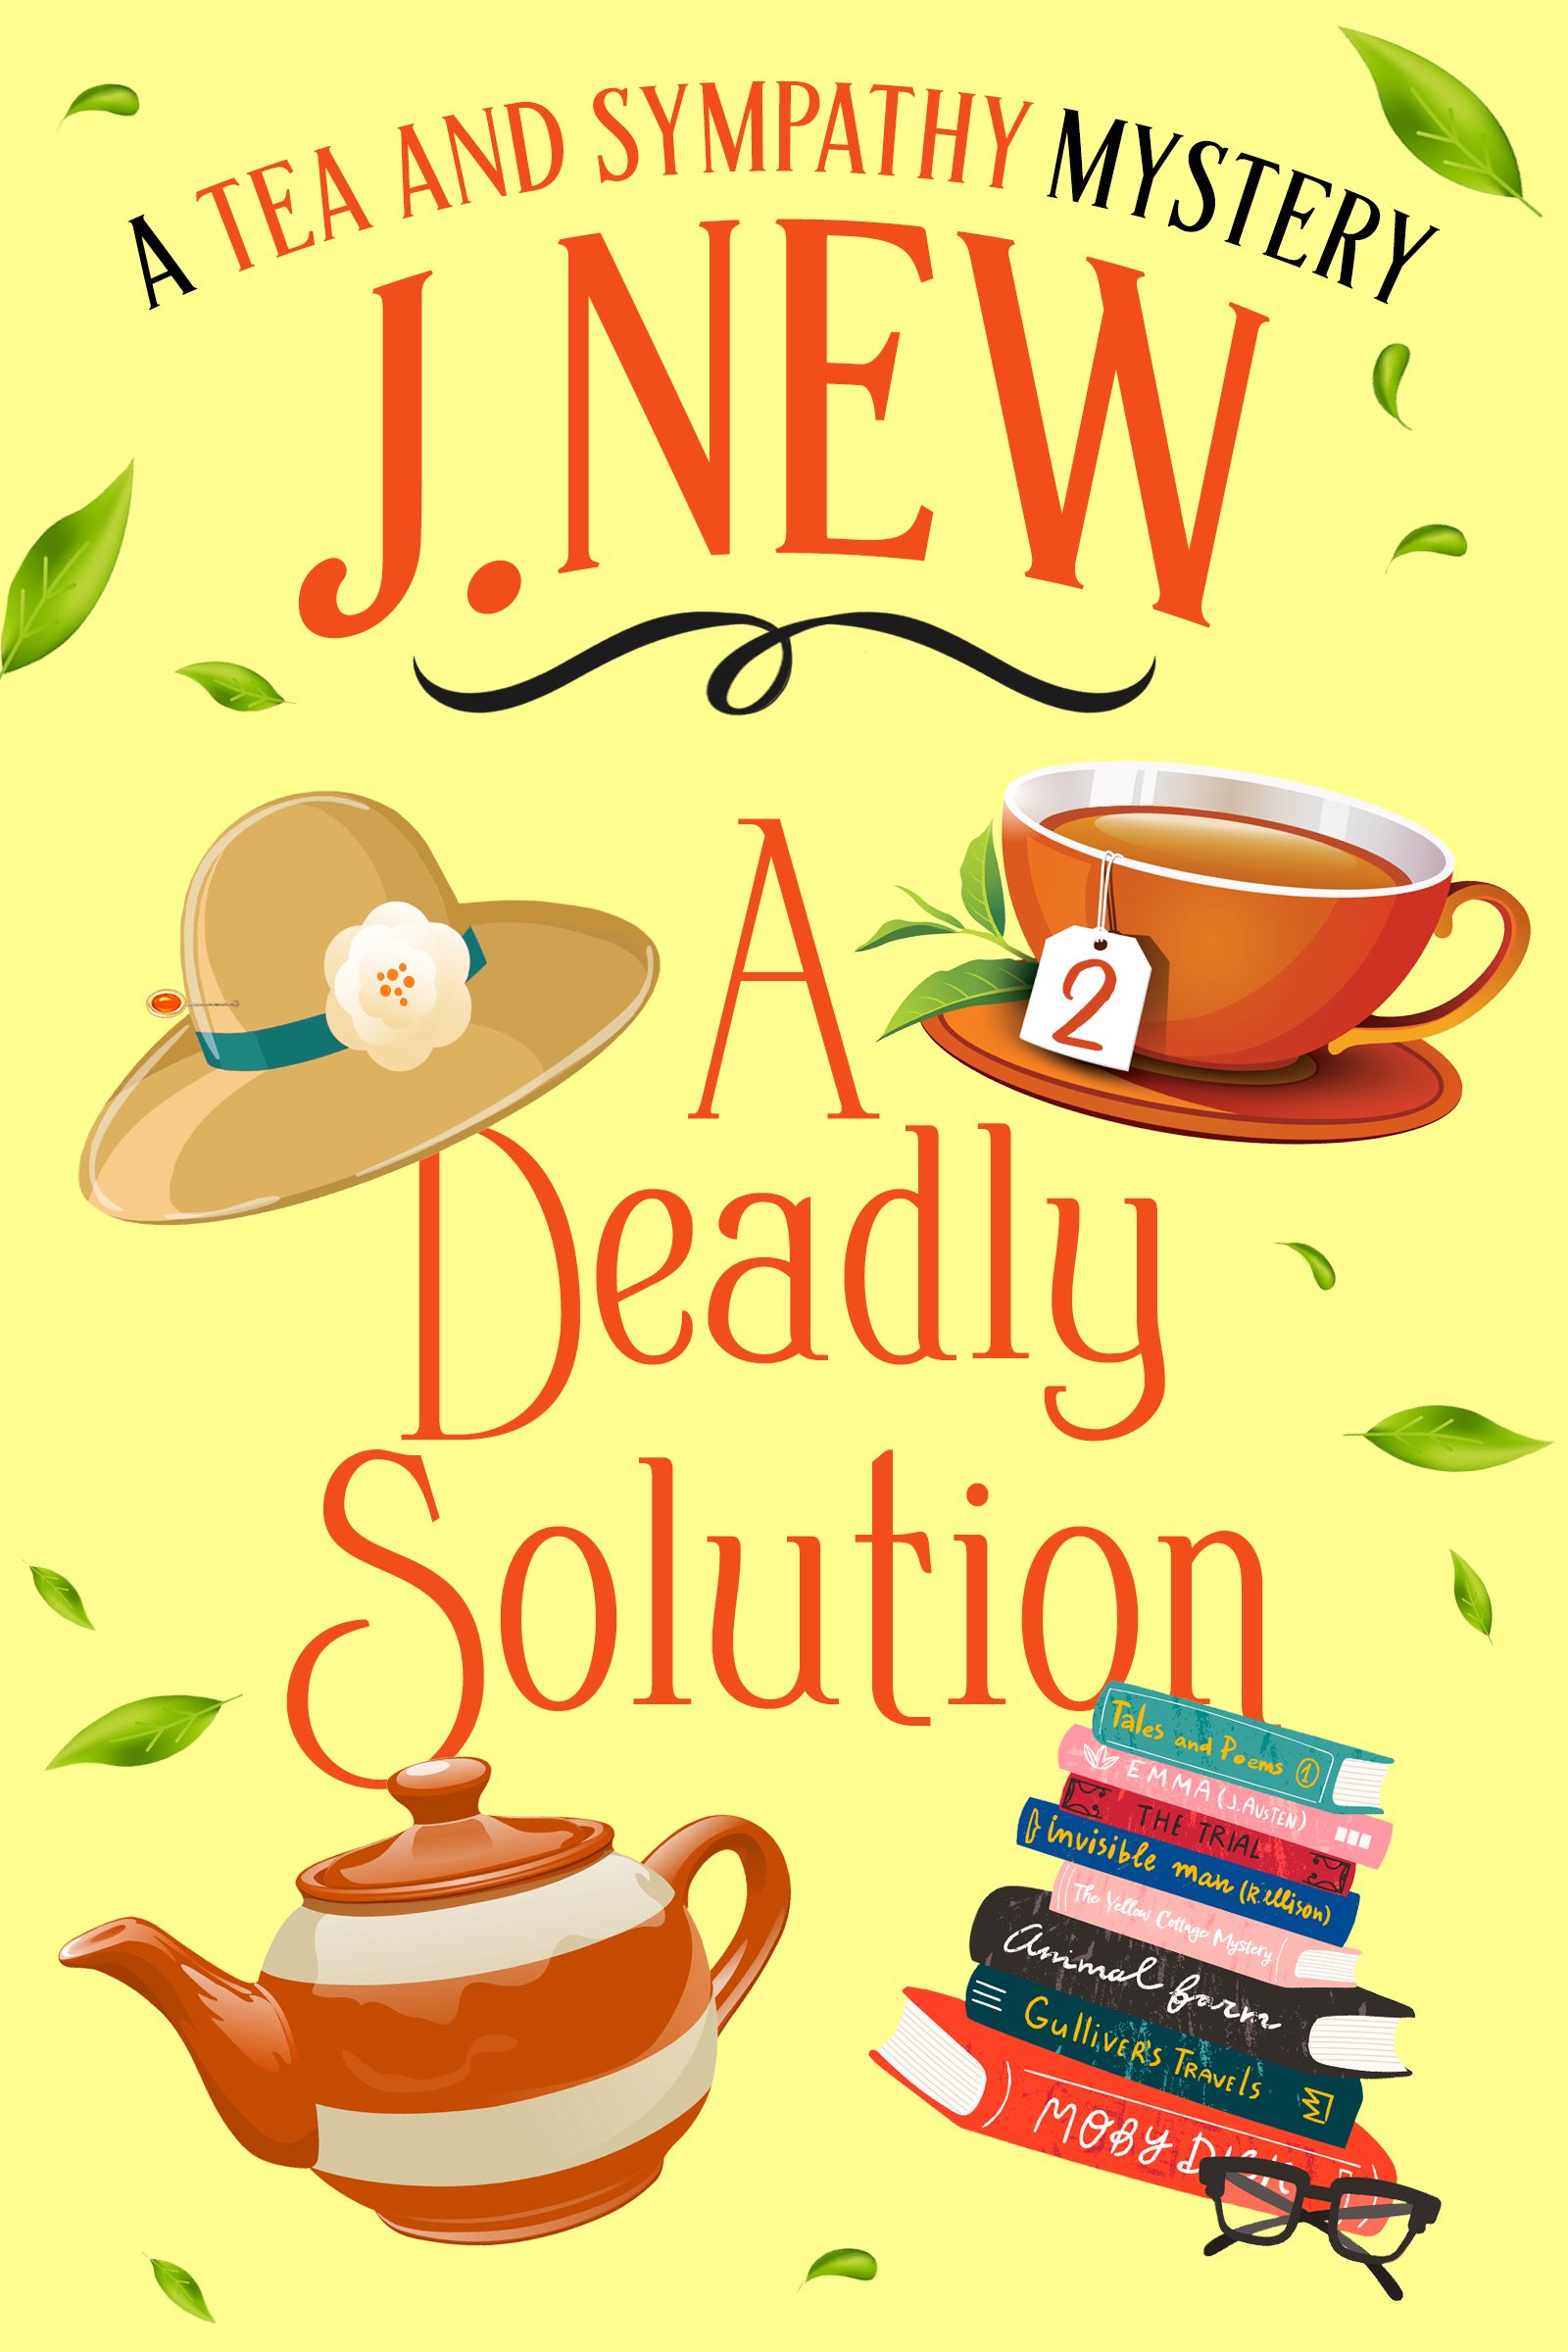 A Deadly Solution is the popular second book in the British cozy culinary mystery series by author J. New